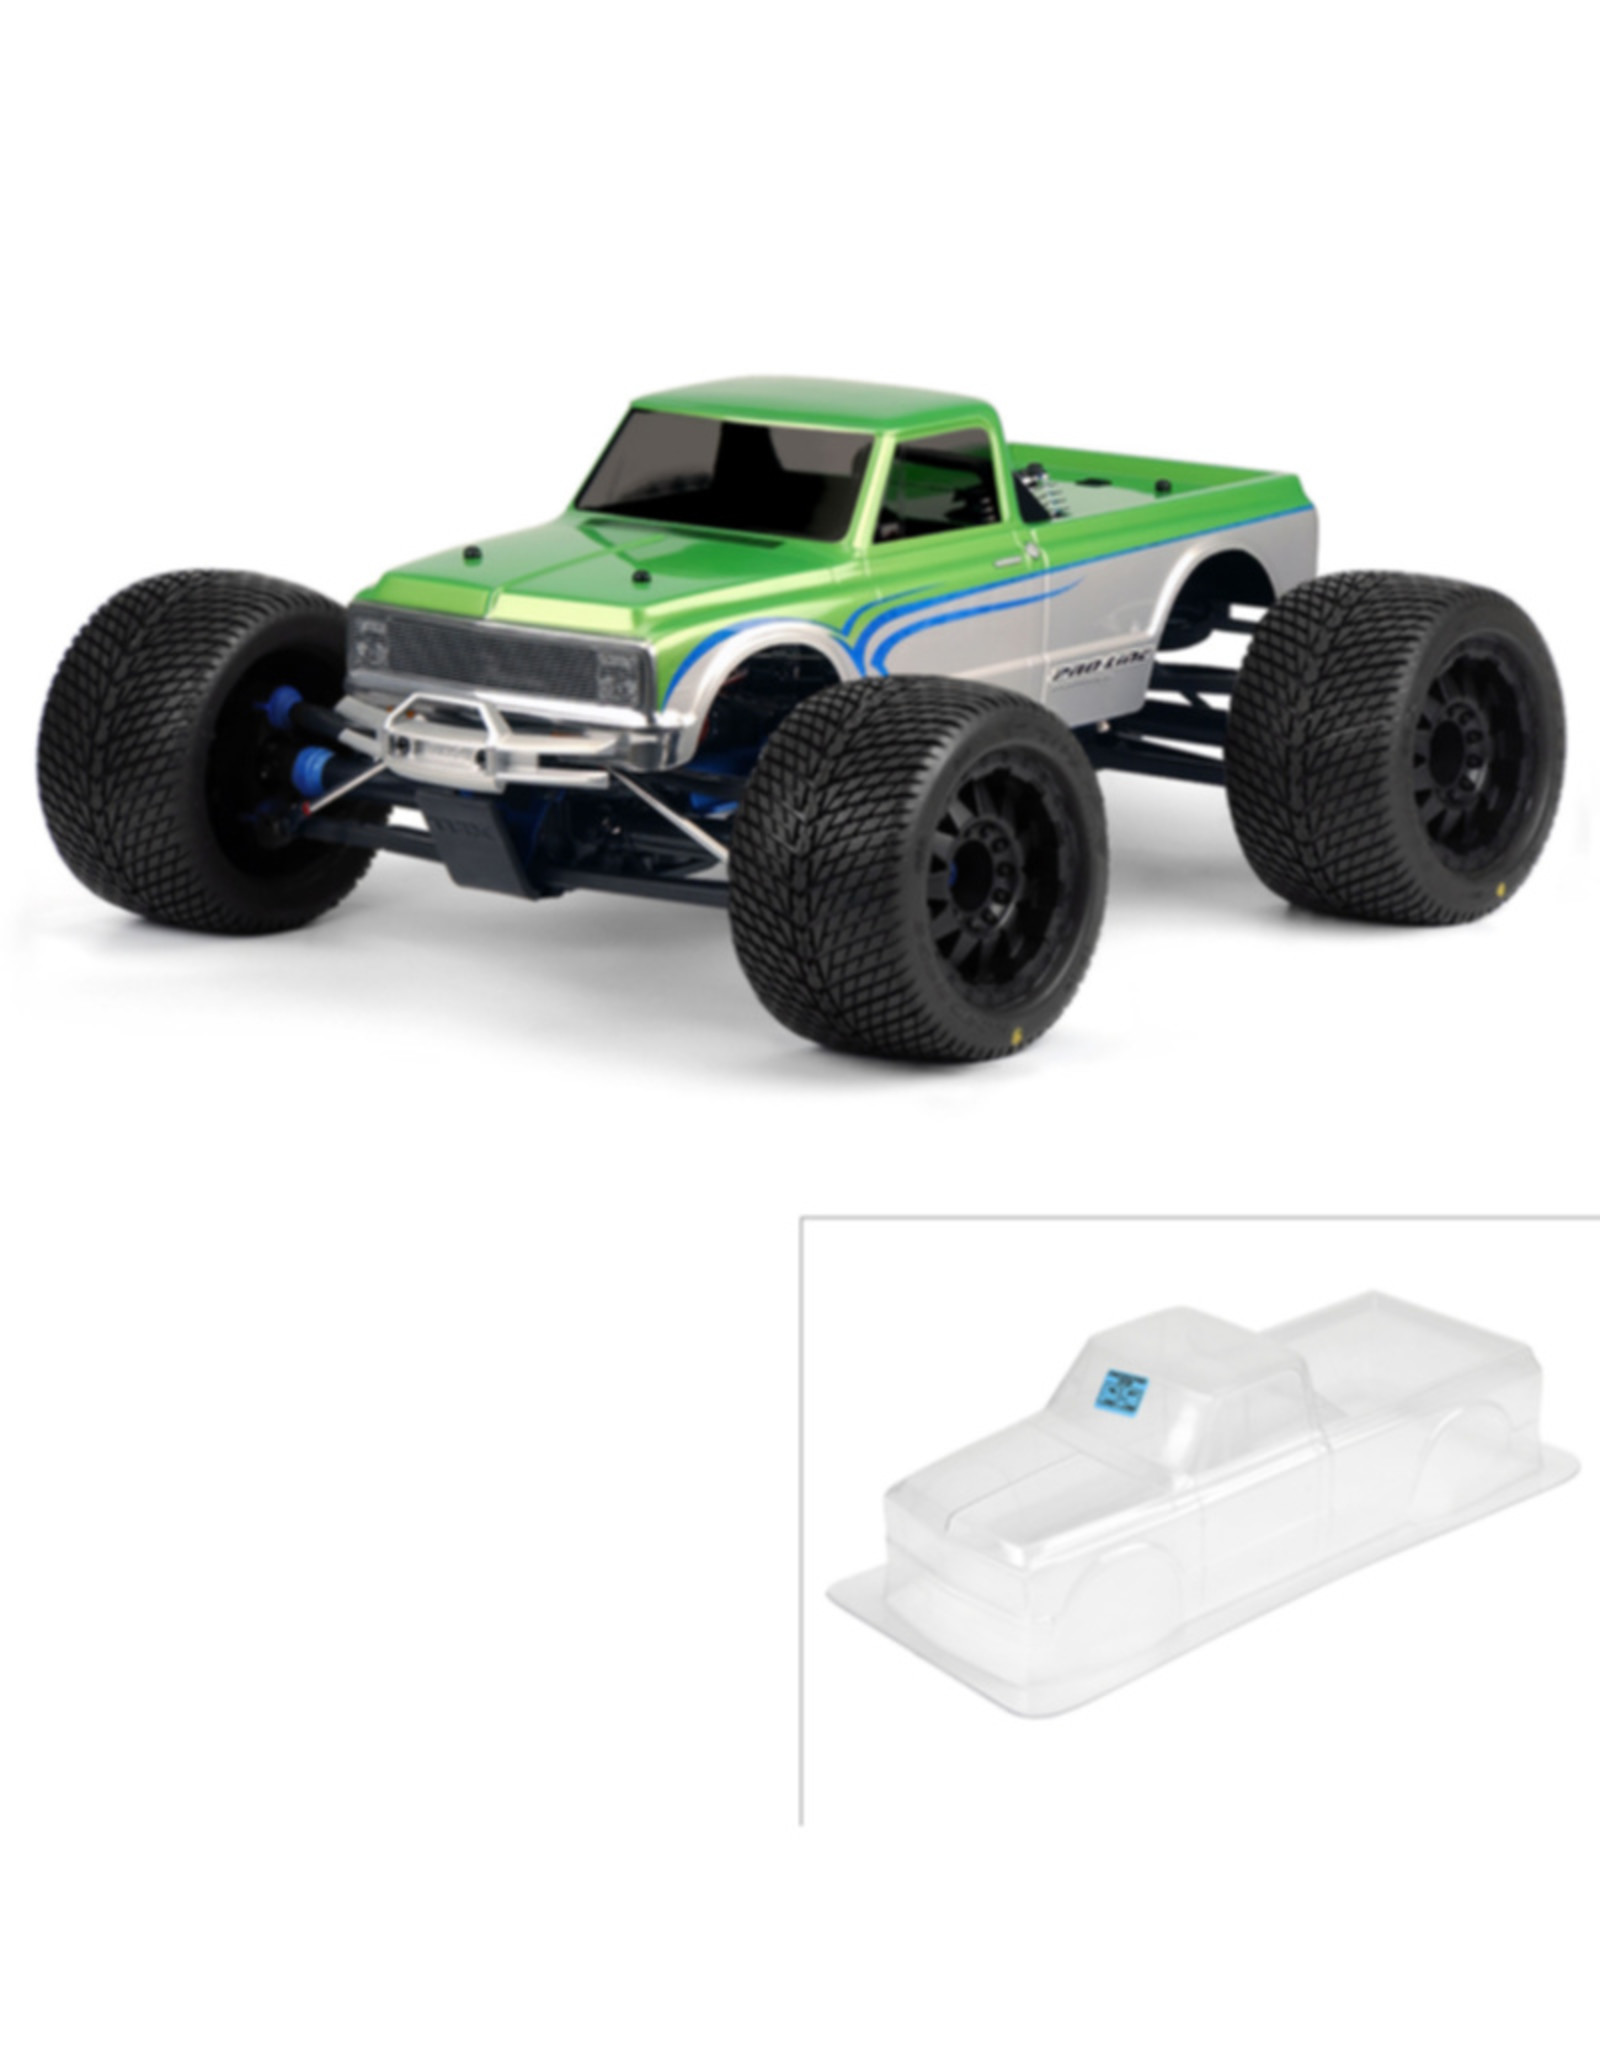 Pro-Line Racing PRO322700 72 Chevy C10 Long Bed Body, Clear:Revo 3.3,LST,MGT